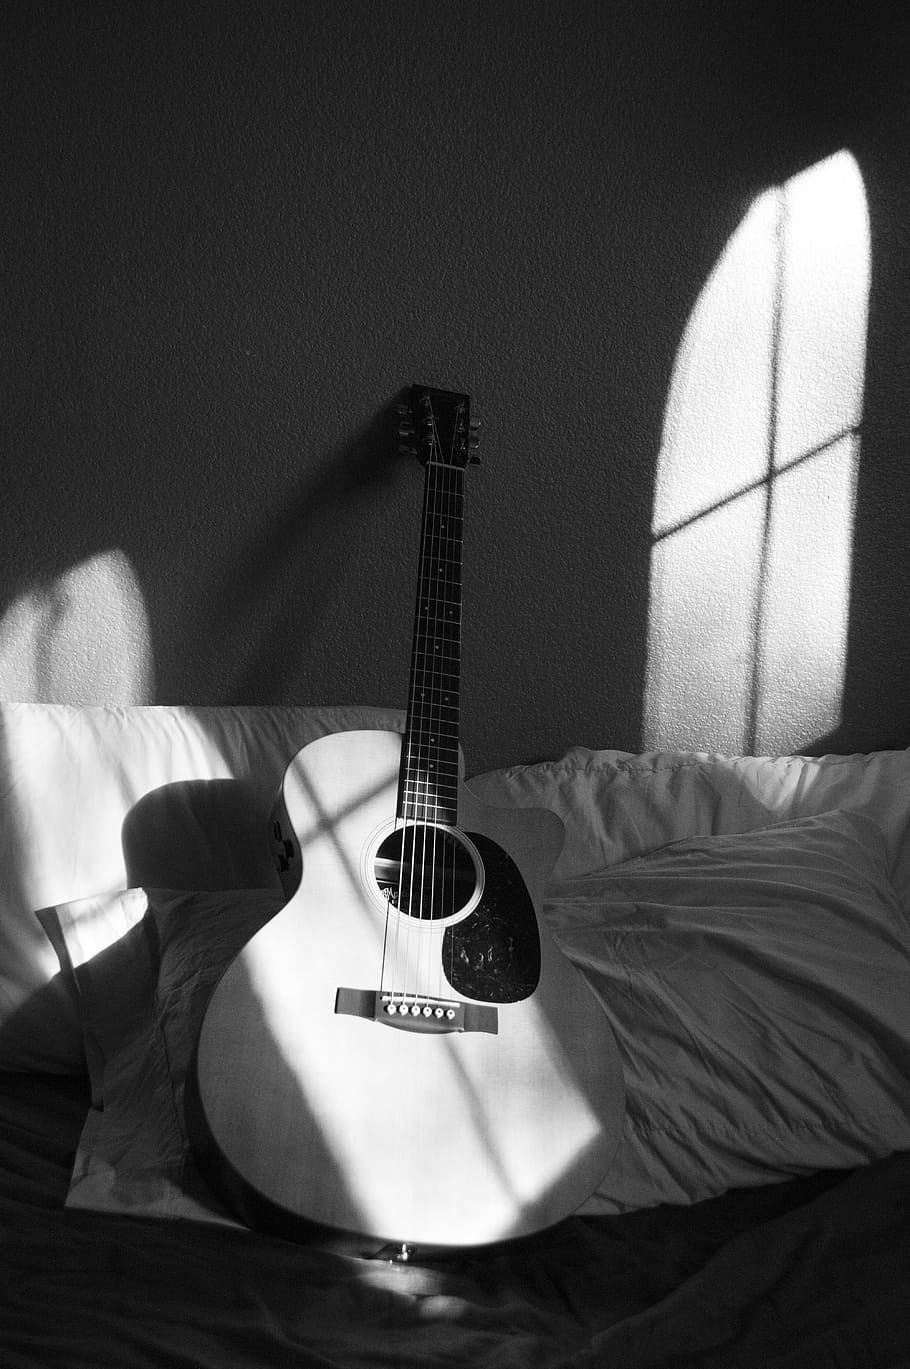 White Acoustic Guitar on Grey and White Textile, black-and-white